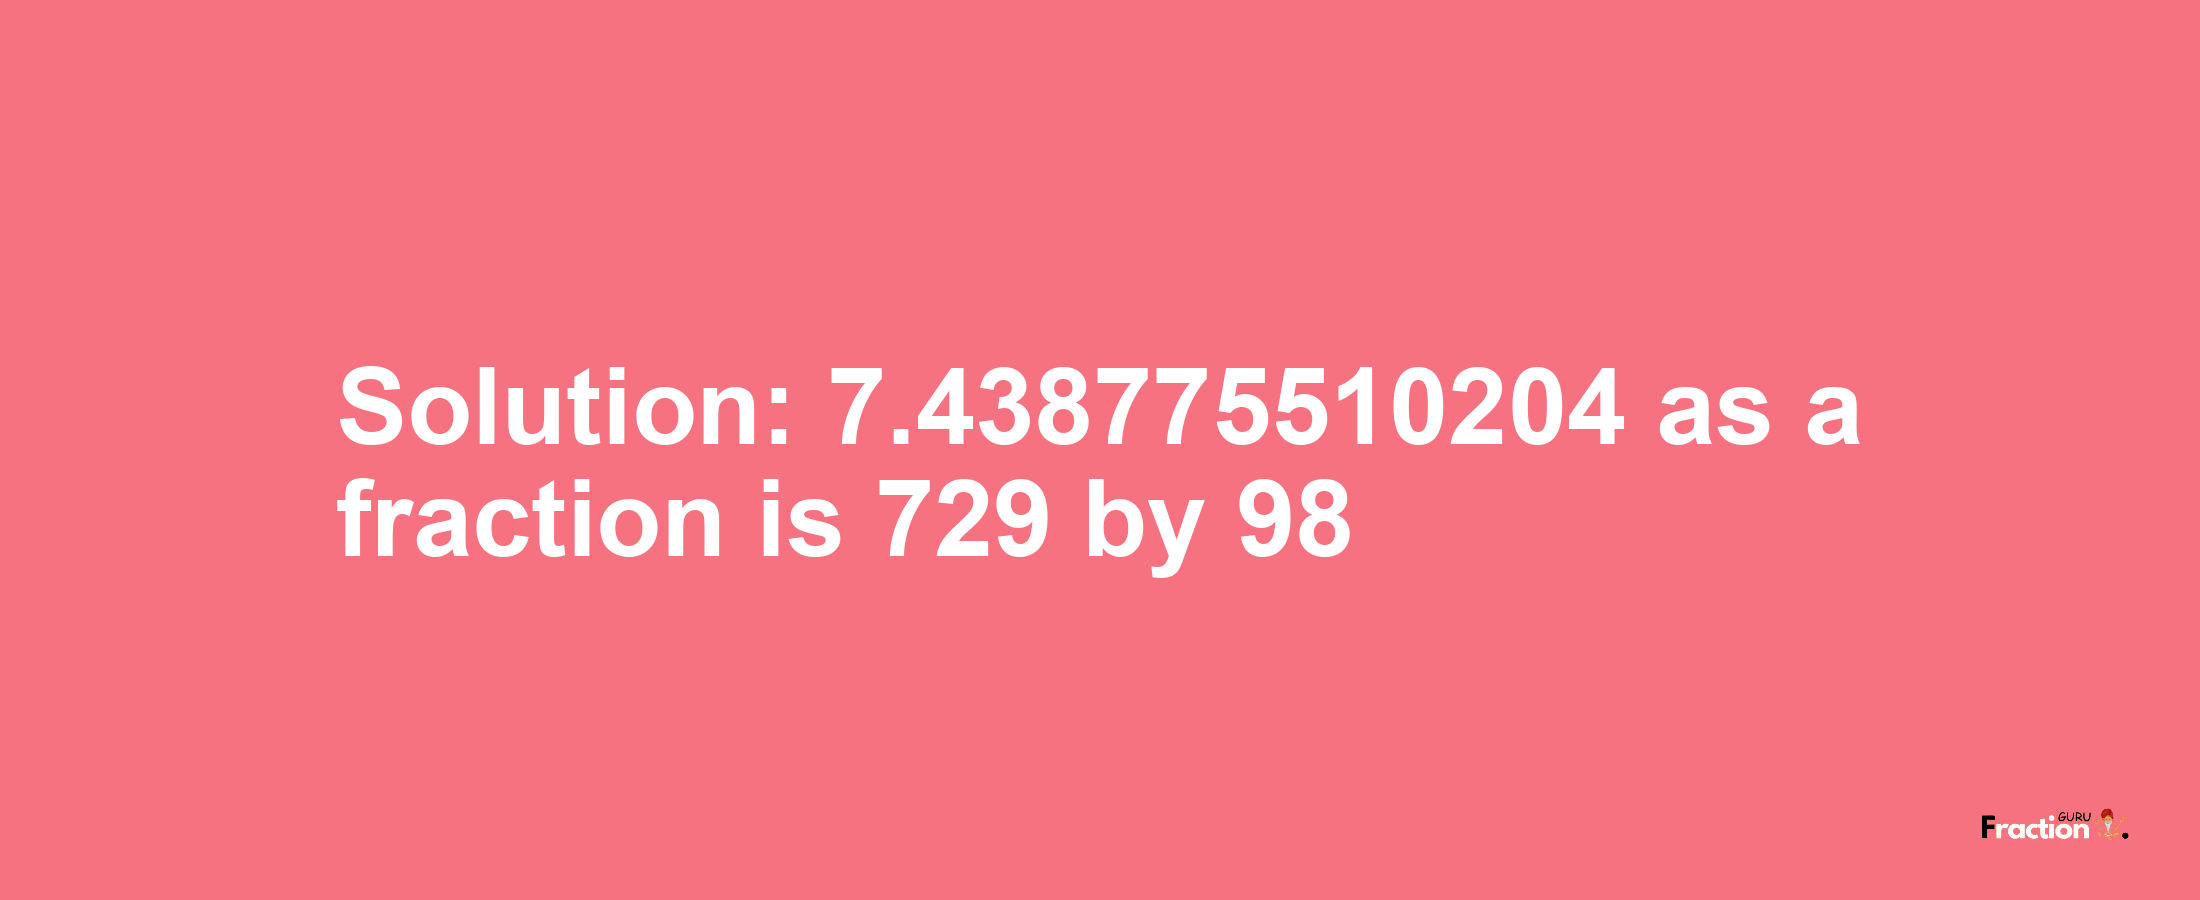 Solution:7.438775510204 as a fraction is 729/98